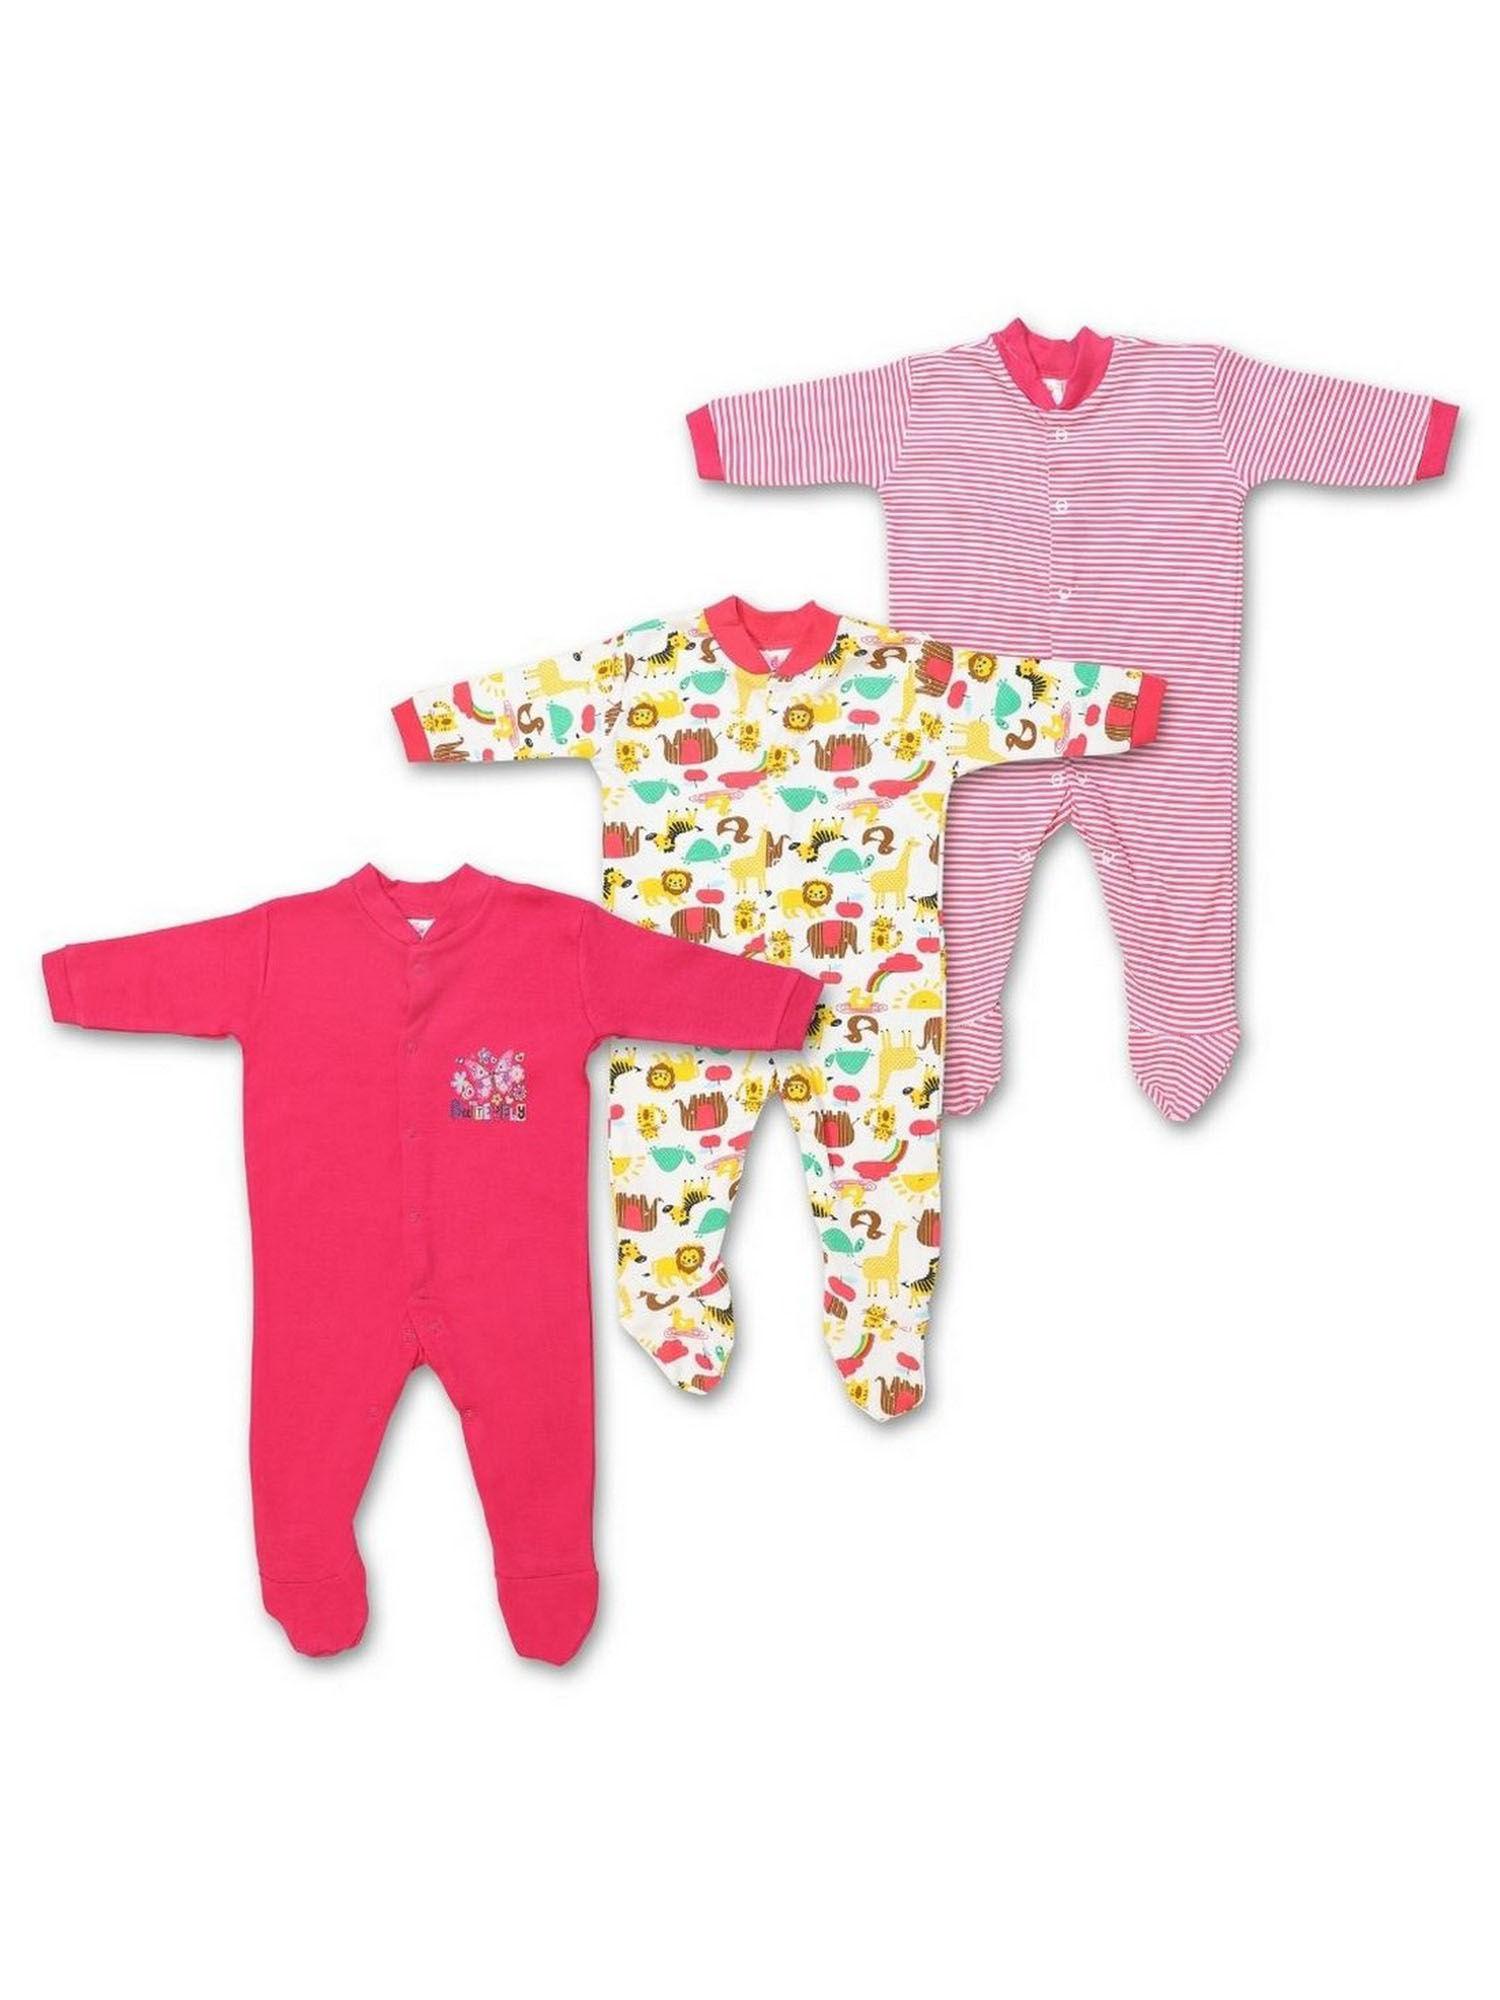 pink cotton baby unisex long sleeve sleepsuits romper (pack of 3)